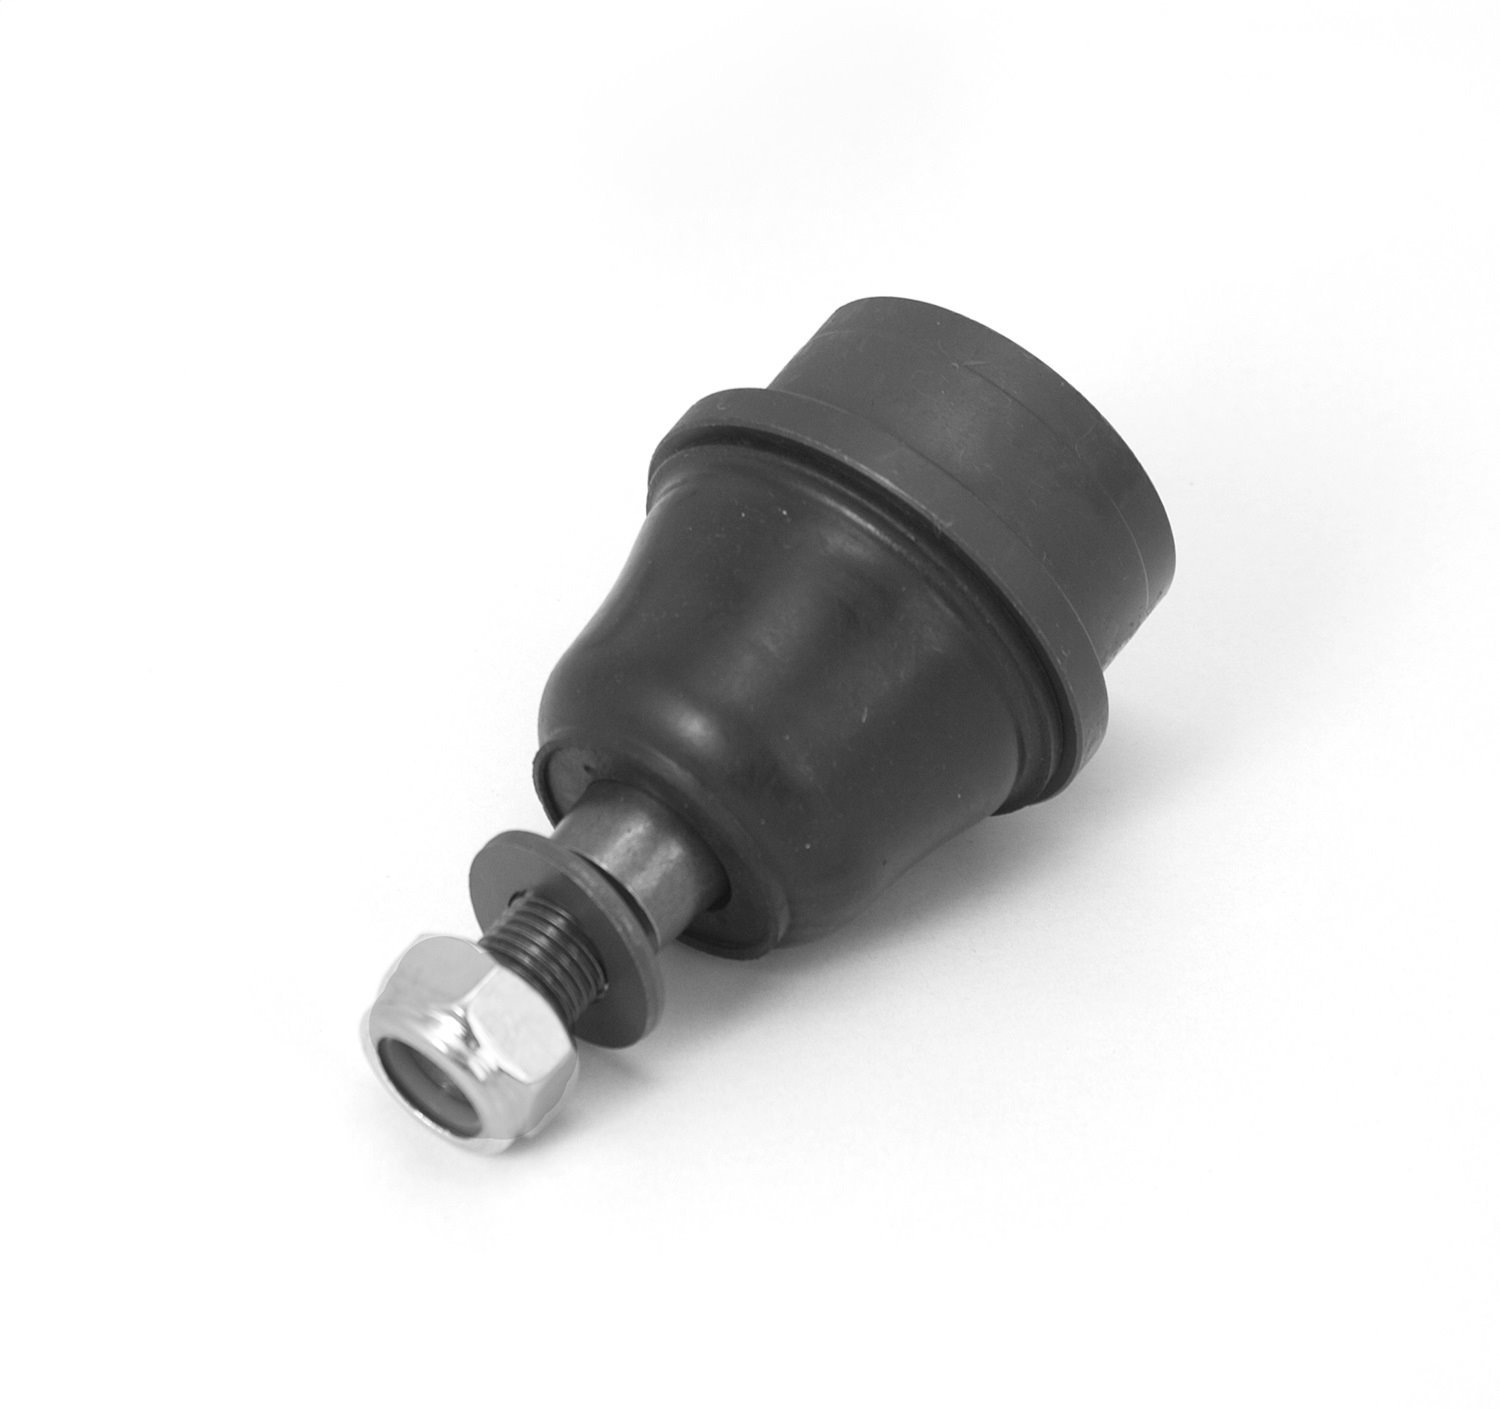 This lower Ball Joint kit from Omix-ADA fits